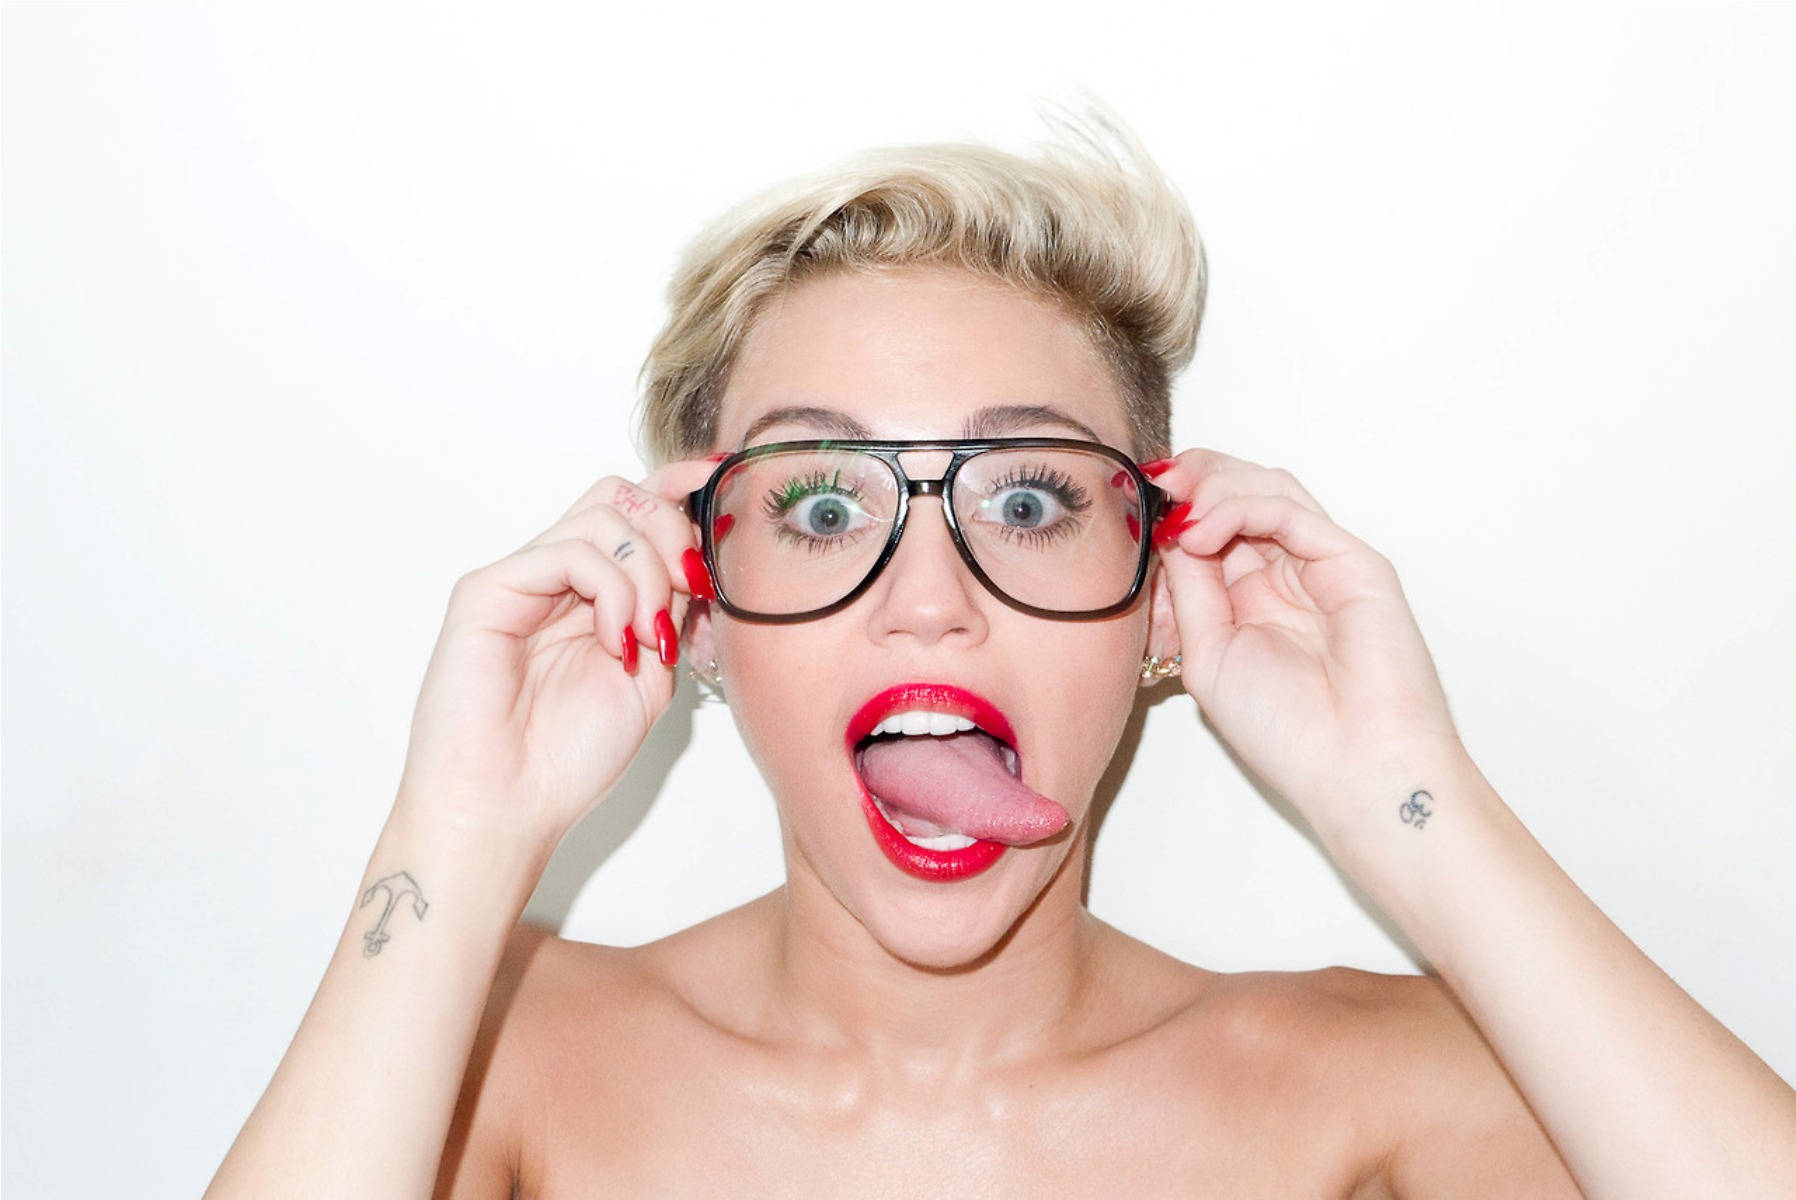 Miley Cyrus showing her goofy side Wallpaper